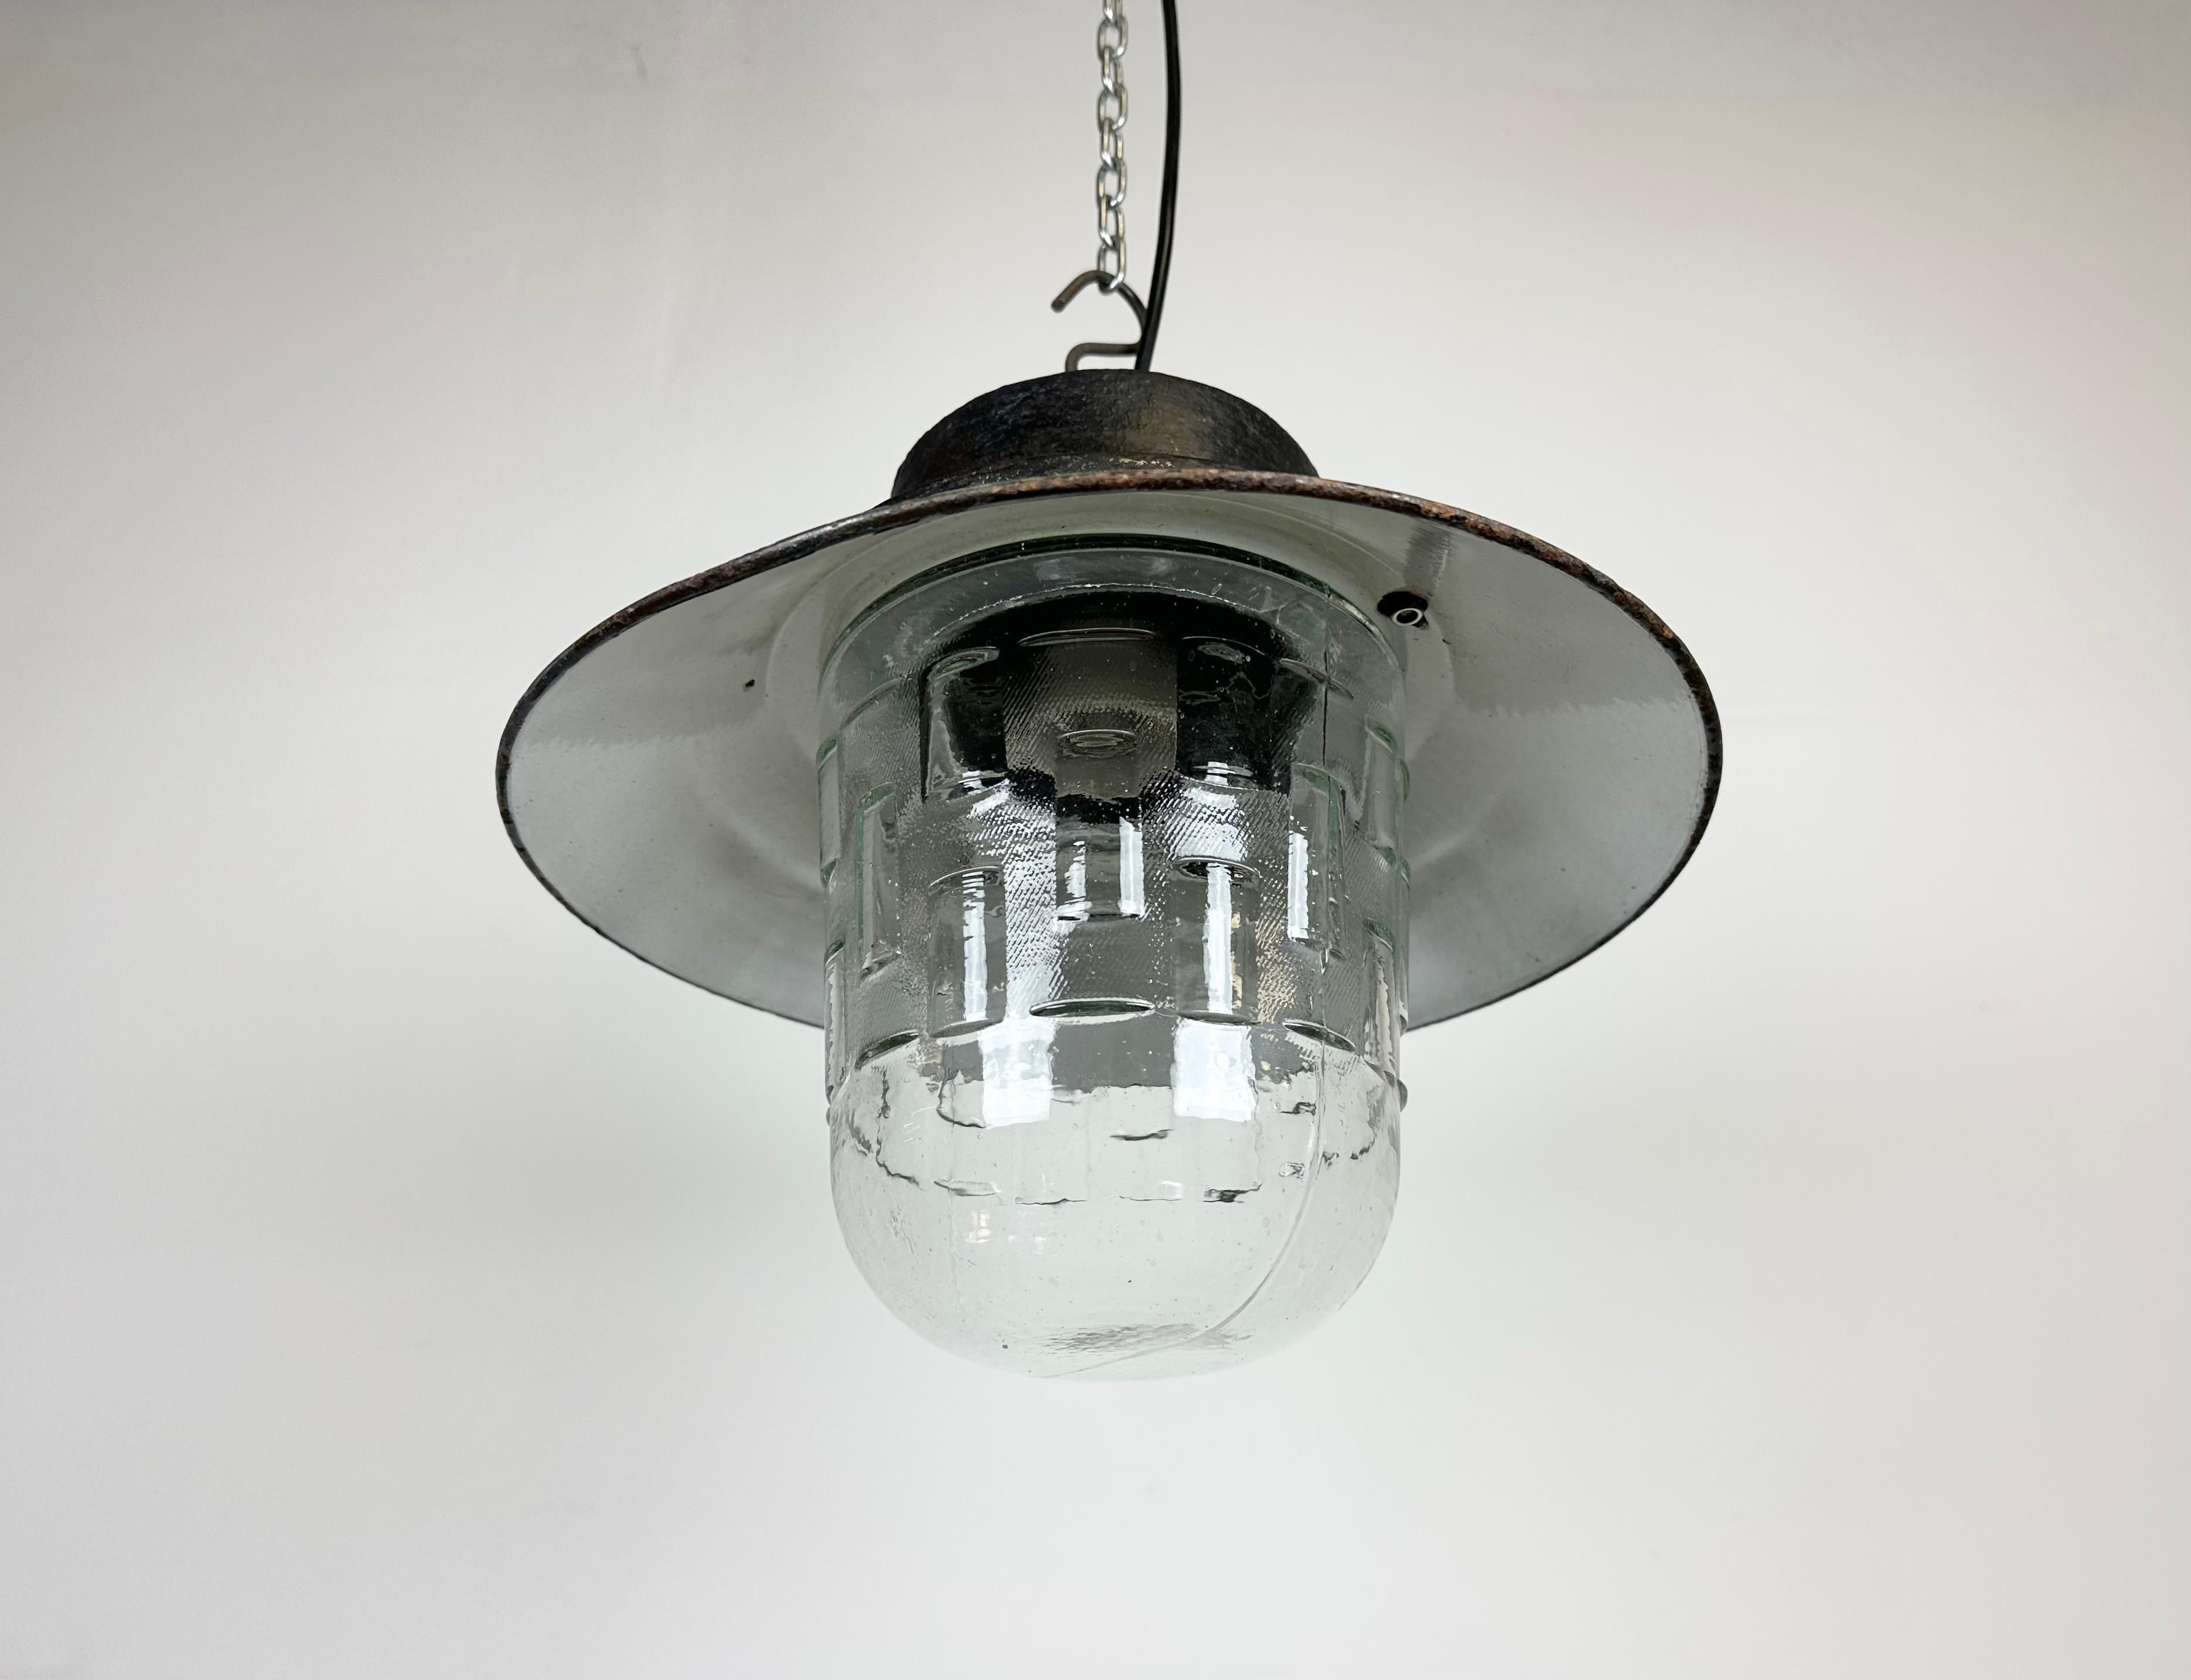 Green Enamel and Cast Iron Industrial Pendant Light, 1960s For Sale 6